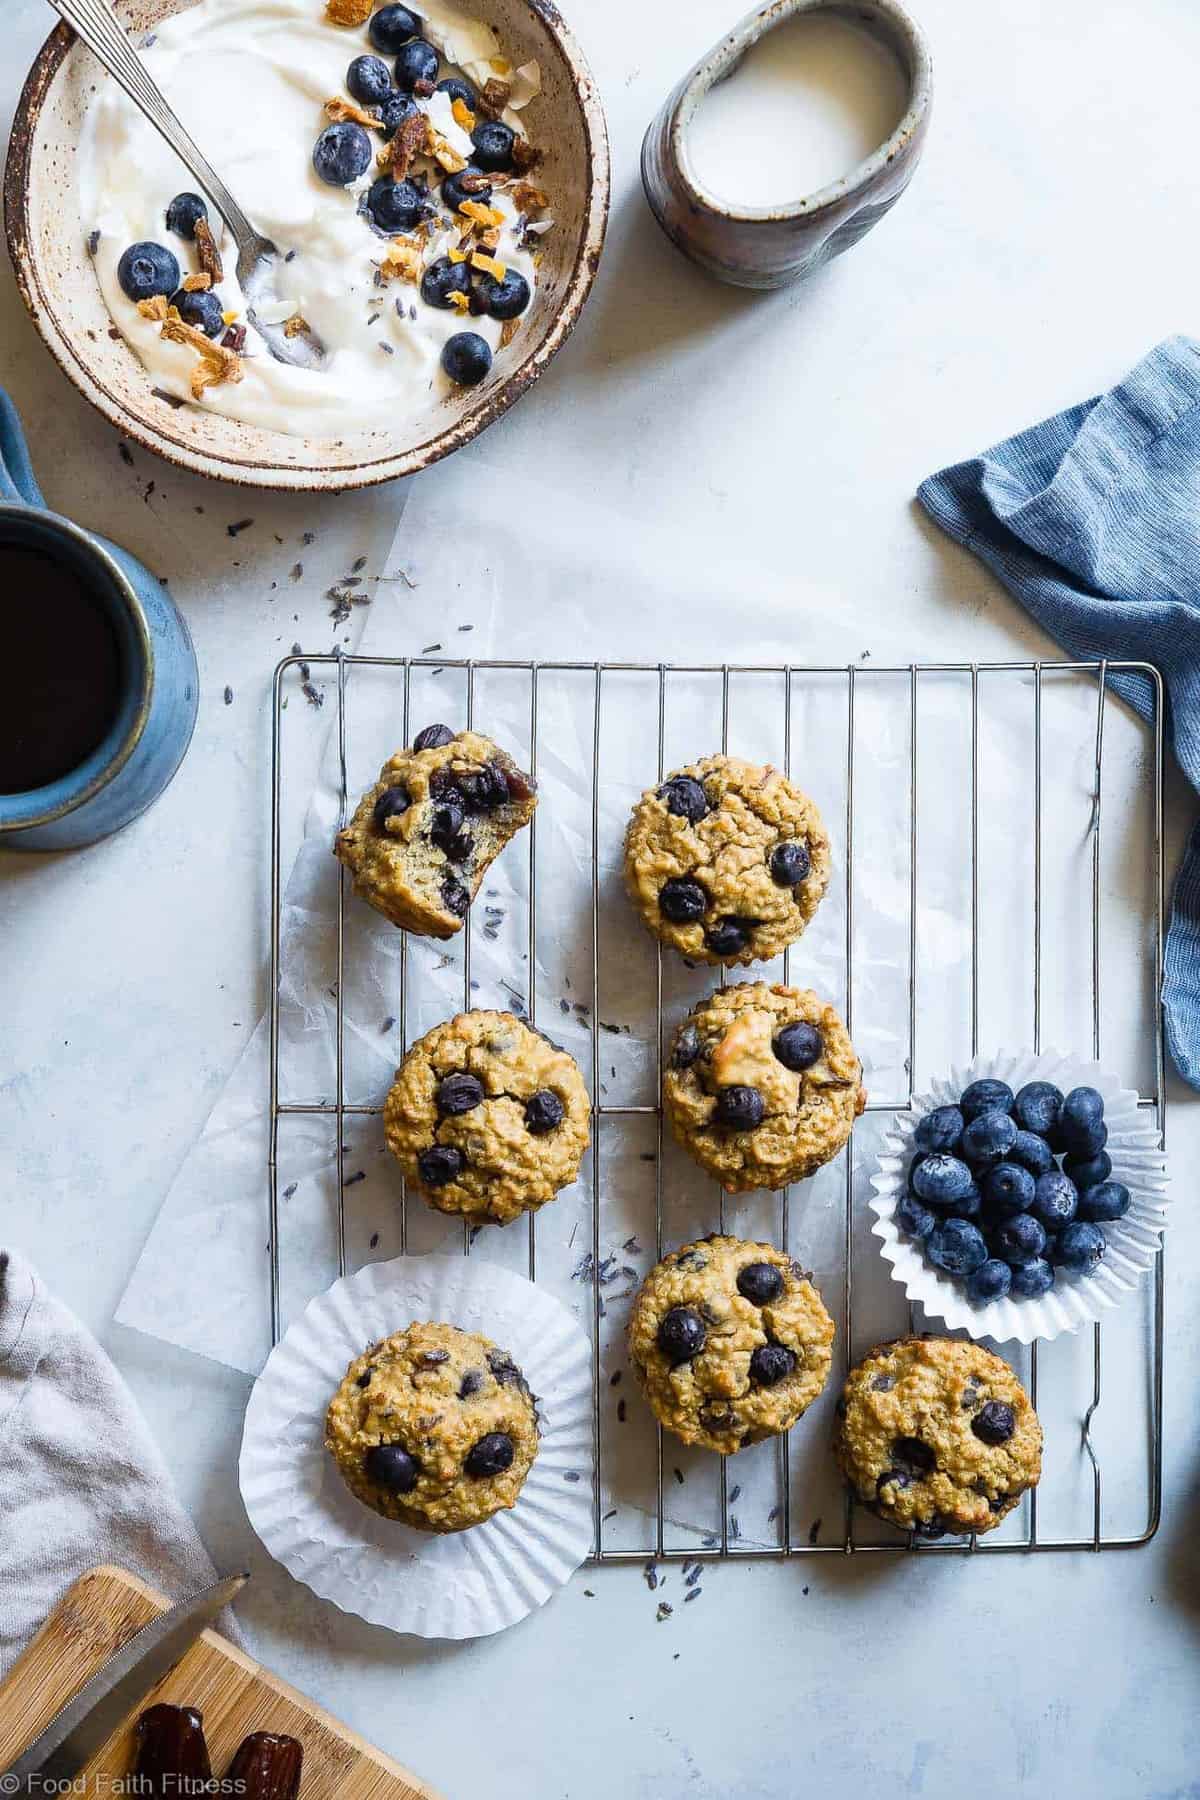 Quinoa Blueberry High Protein Muffins - Naturally sweetened, gluten free, dairy free and packed with plant based protein and fiber! These muffins are quick and easy to make and great for kids lunchboxes or snacks! Adults love them too! | #Foodfaithfitness | #Glutenfree #Dairyfree #Proteinpowder #Healthy #Quinoa